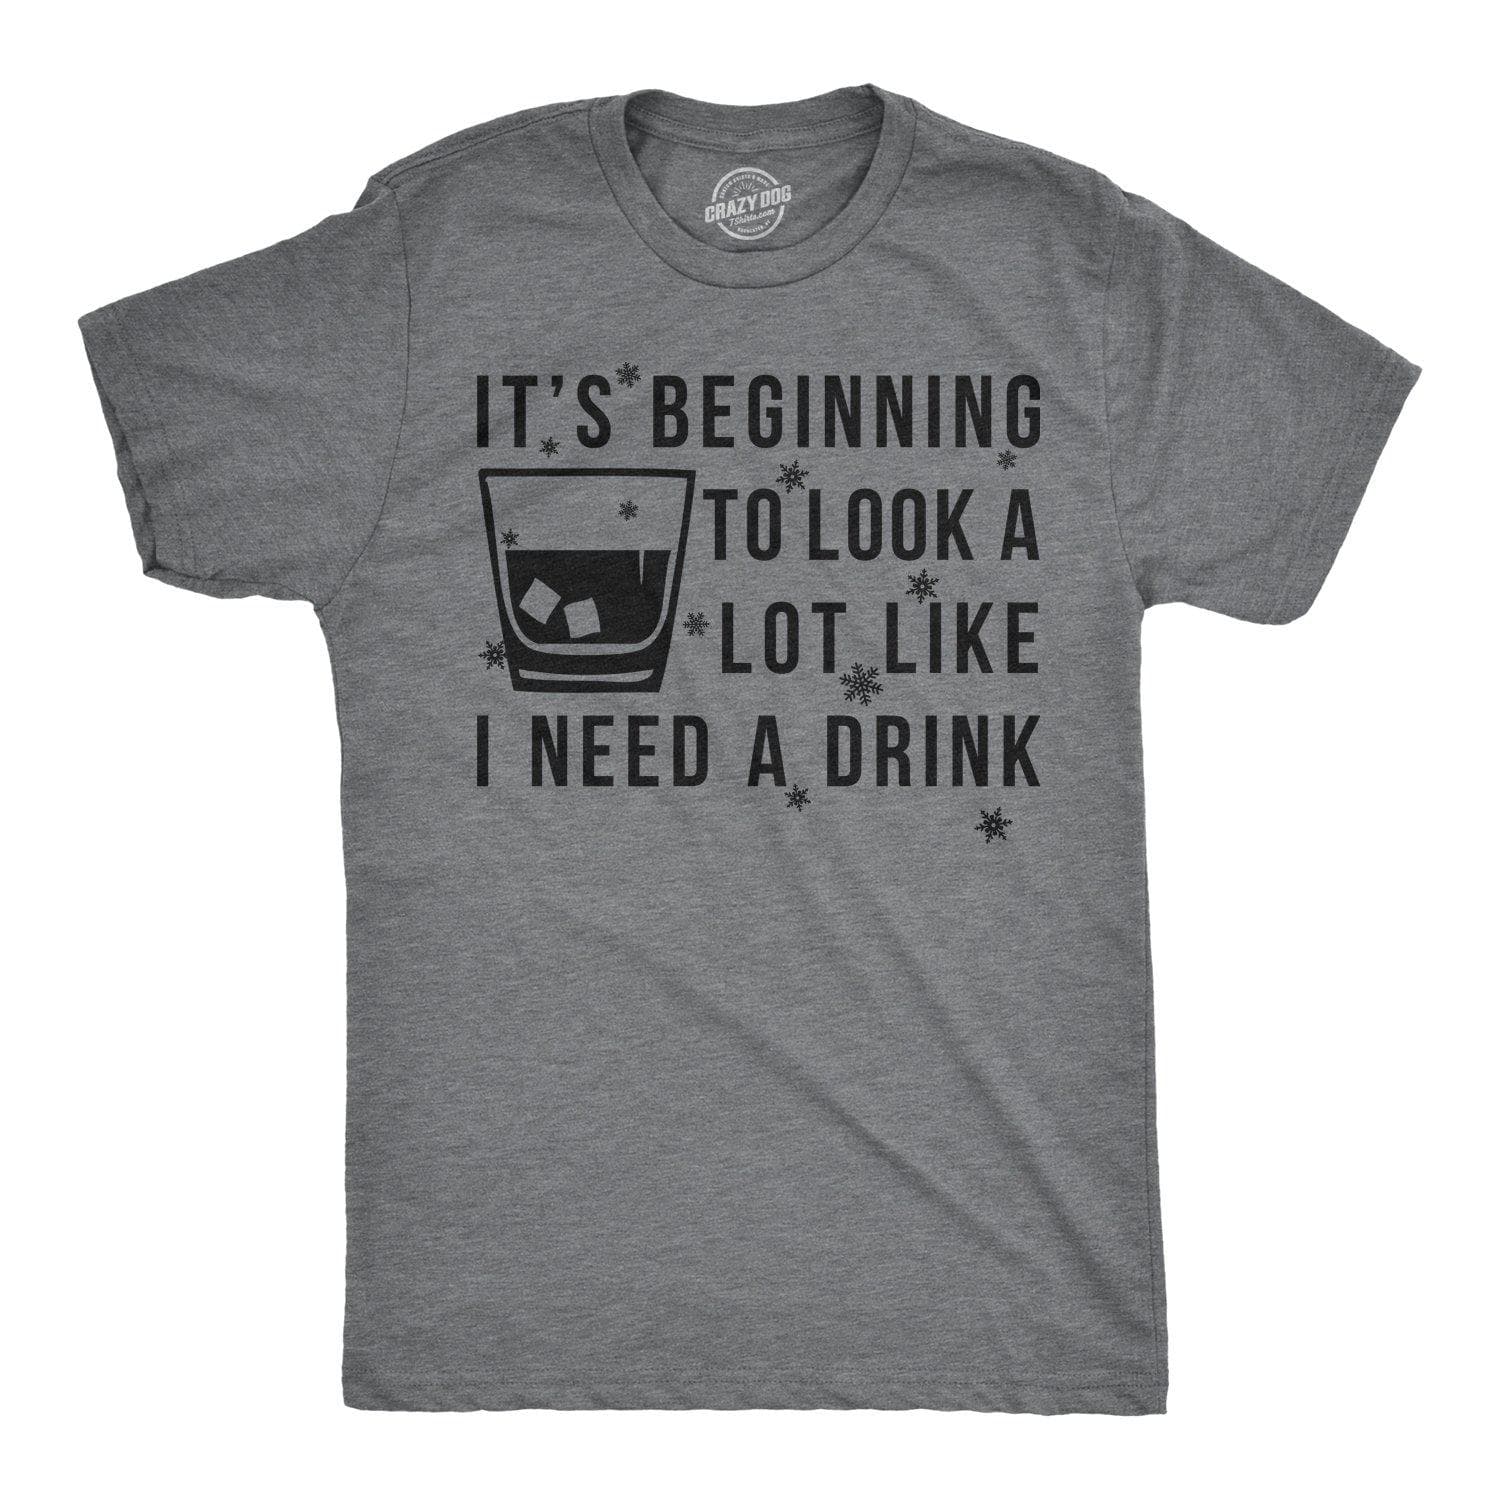 It's Beginning To Look A Lot Like I Need A Drink Men's Tshirt - Crazy Dog T-Shirts